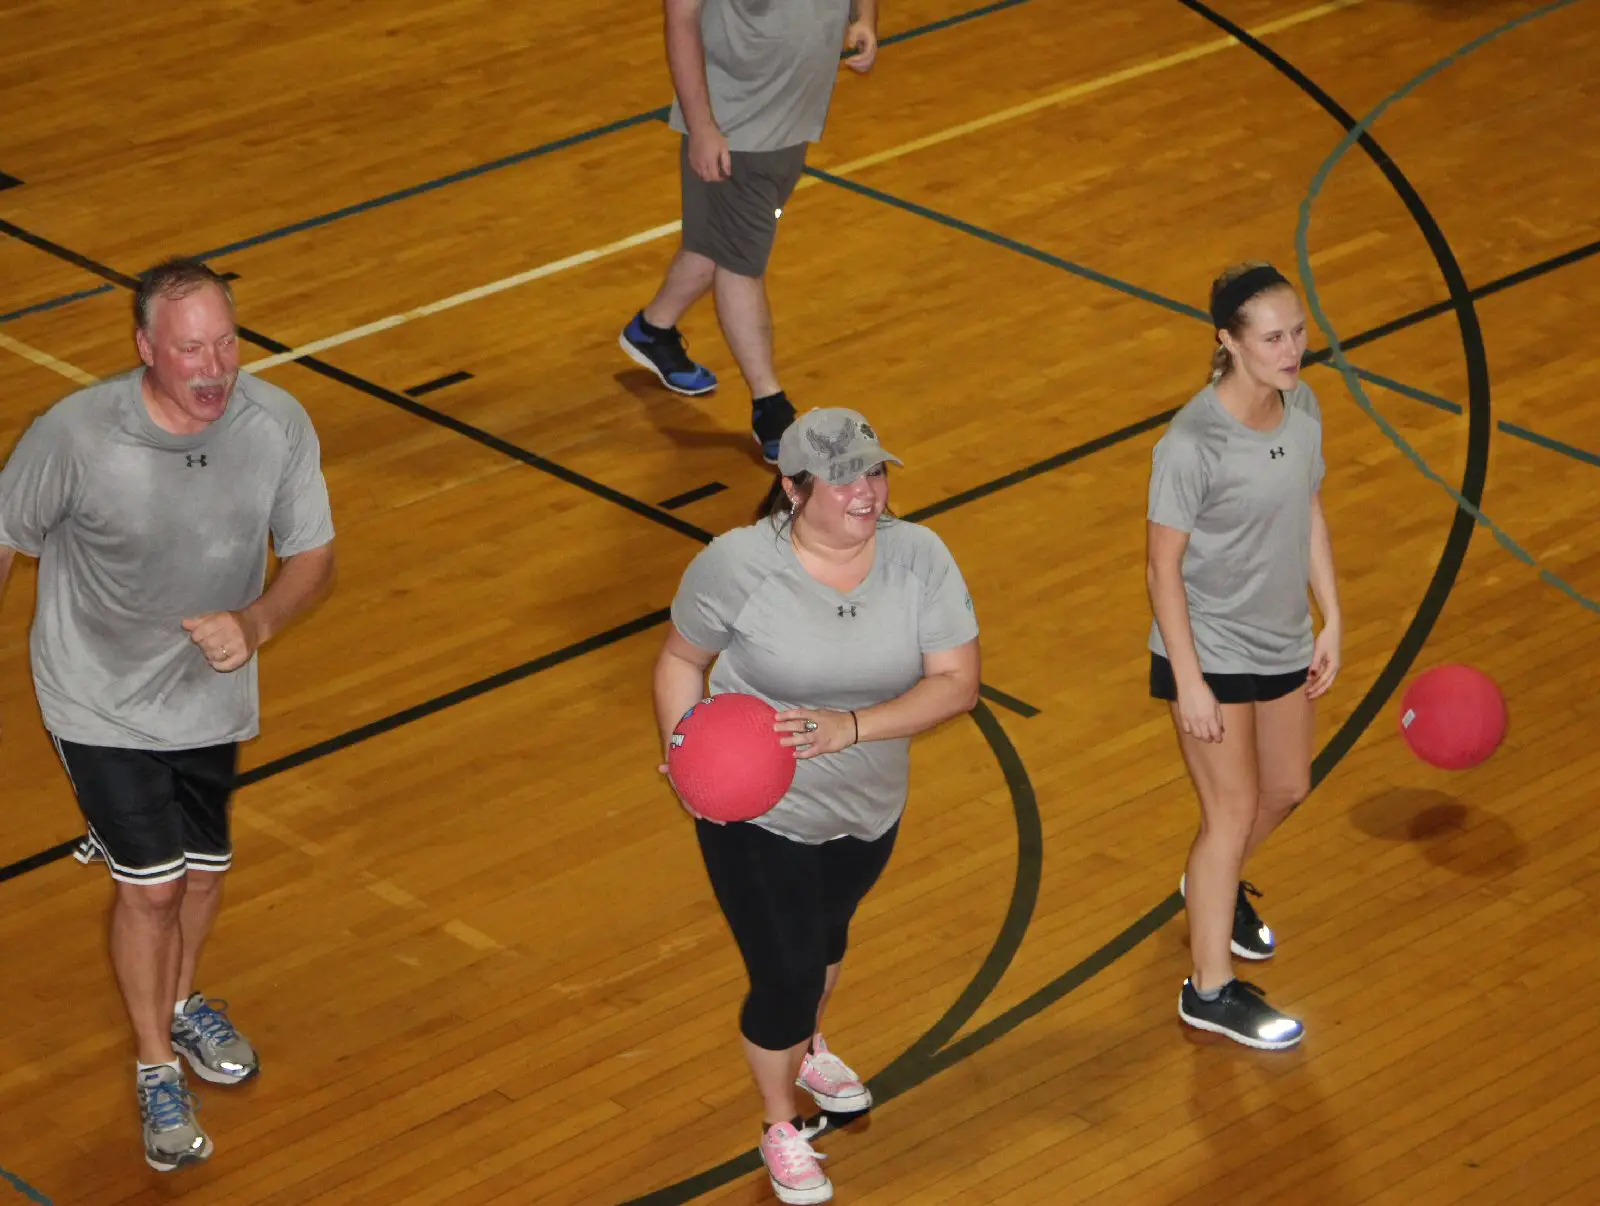 Dodge Duck Dip Dive And Dodge Dodgeball Tournament Hits The